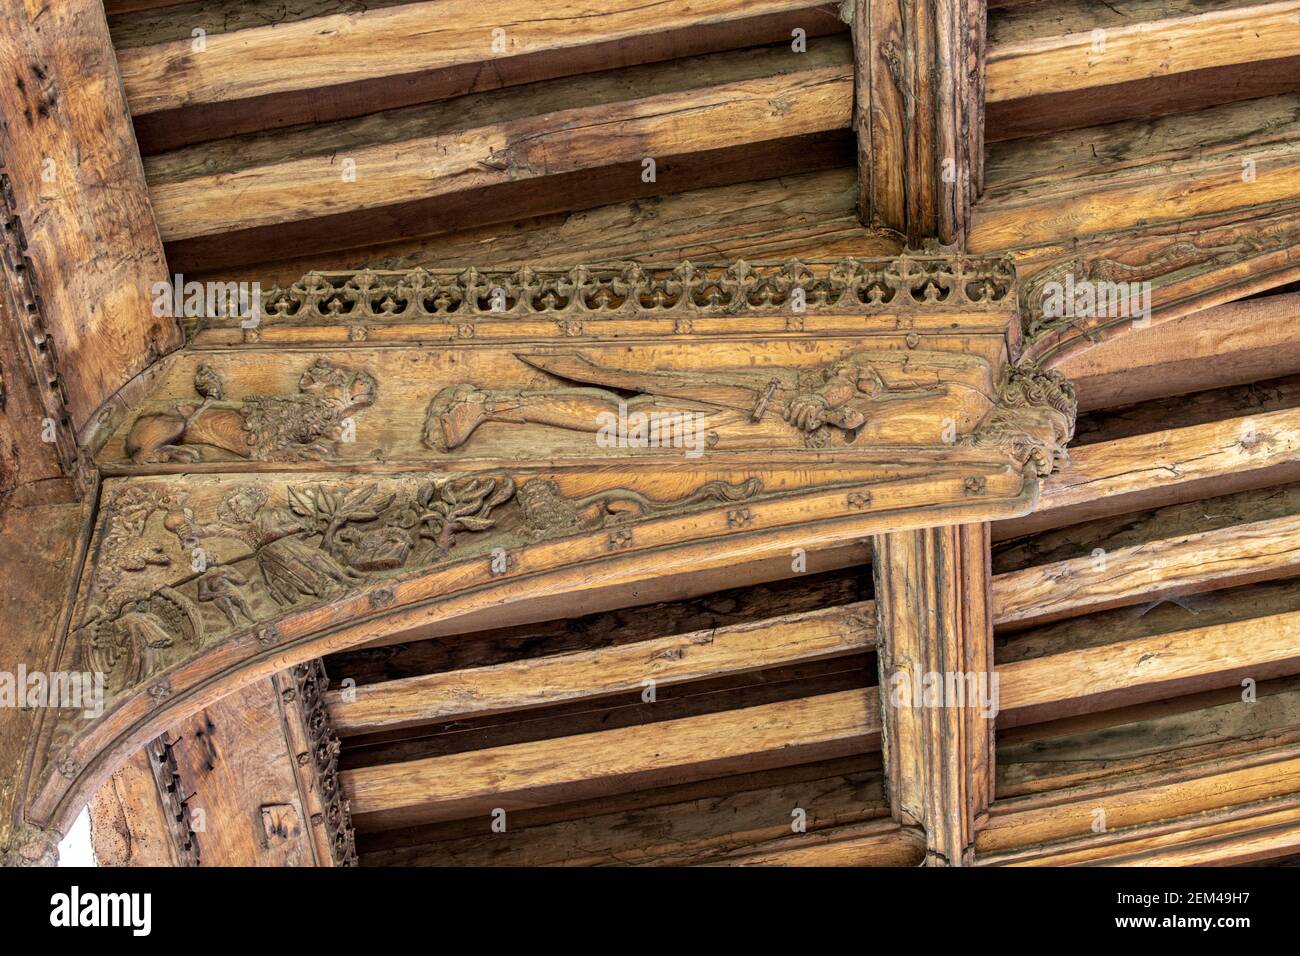 The !5th century carved hammerbeam roof of the 13th century church of St Mary at Mildenhall, Suffolk UK Stock Photo